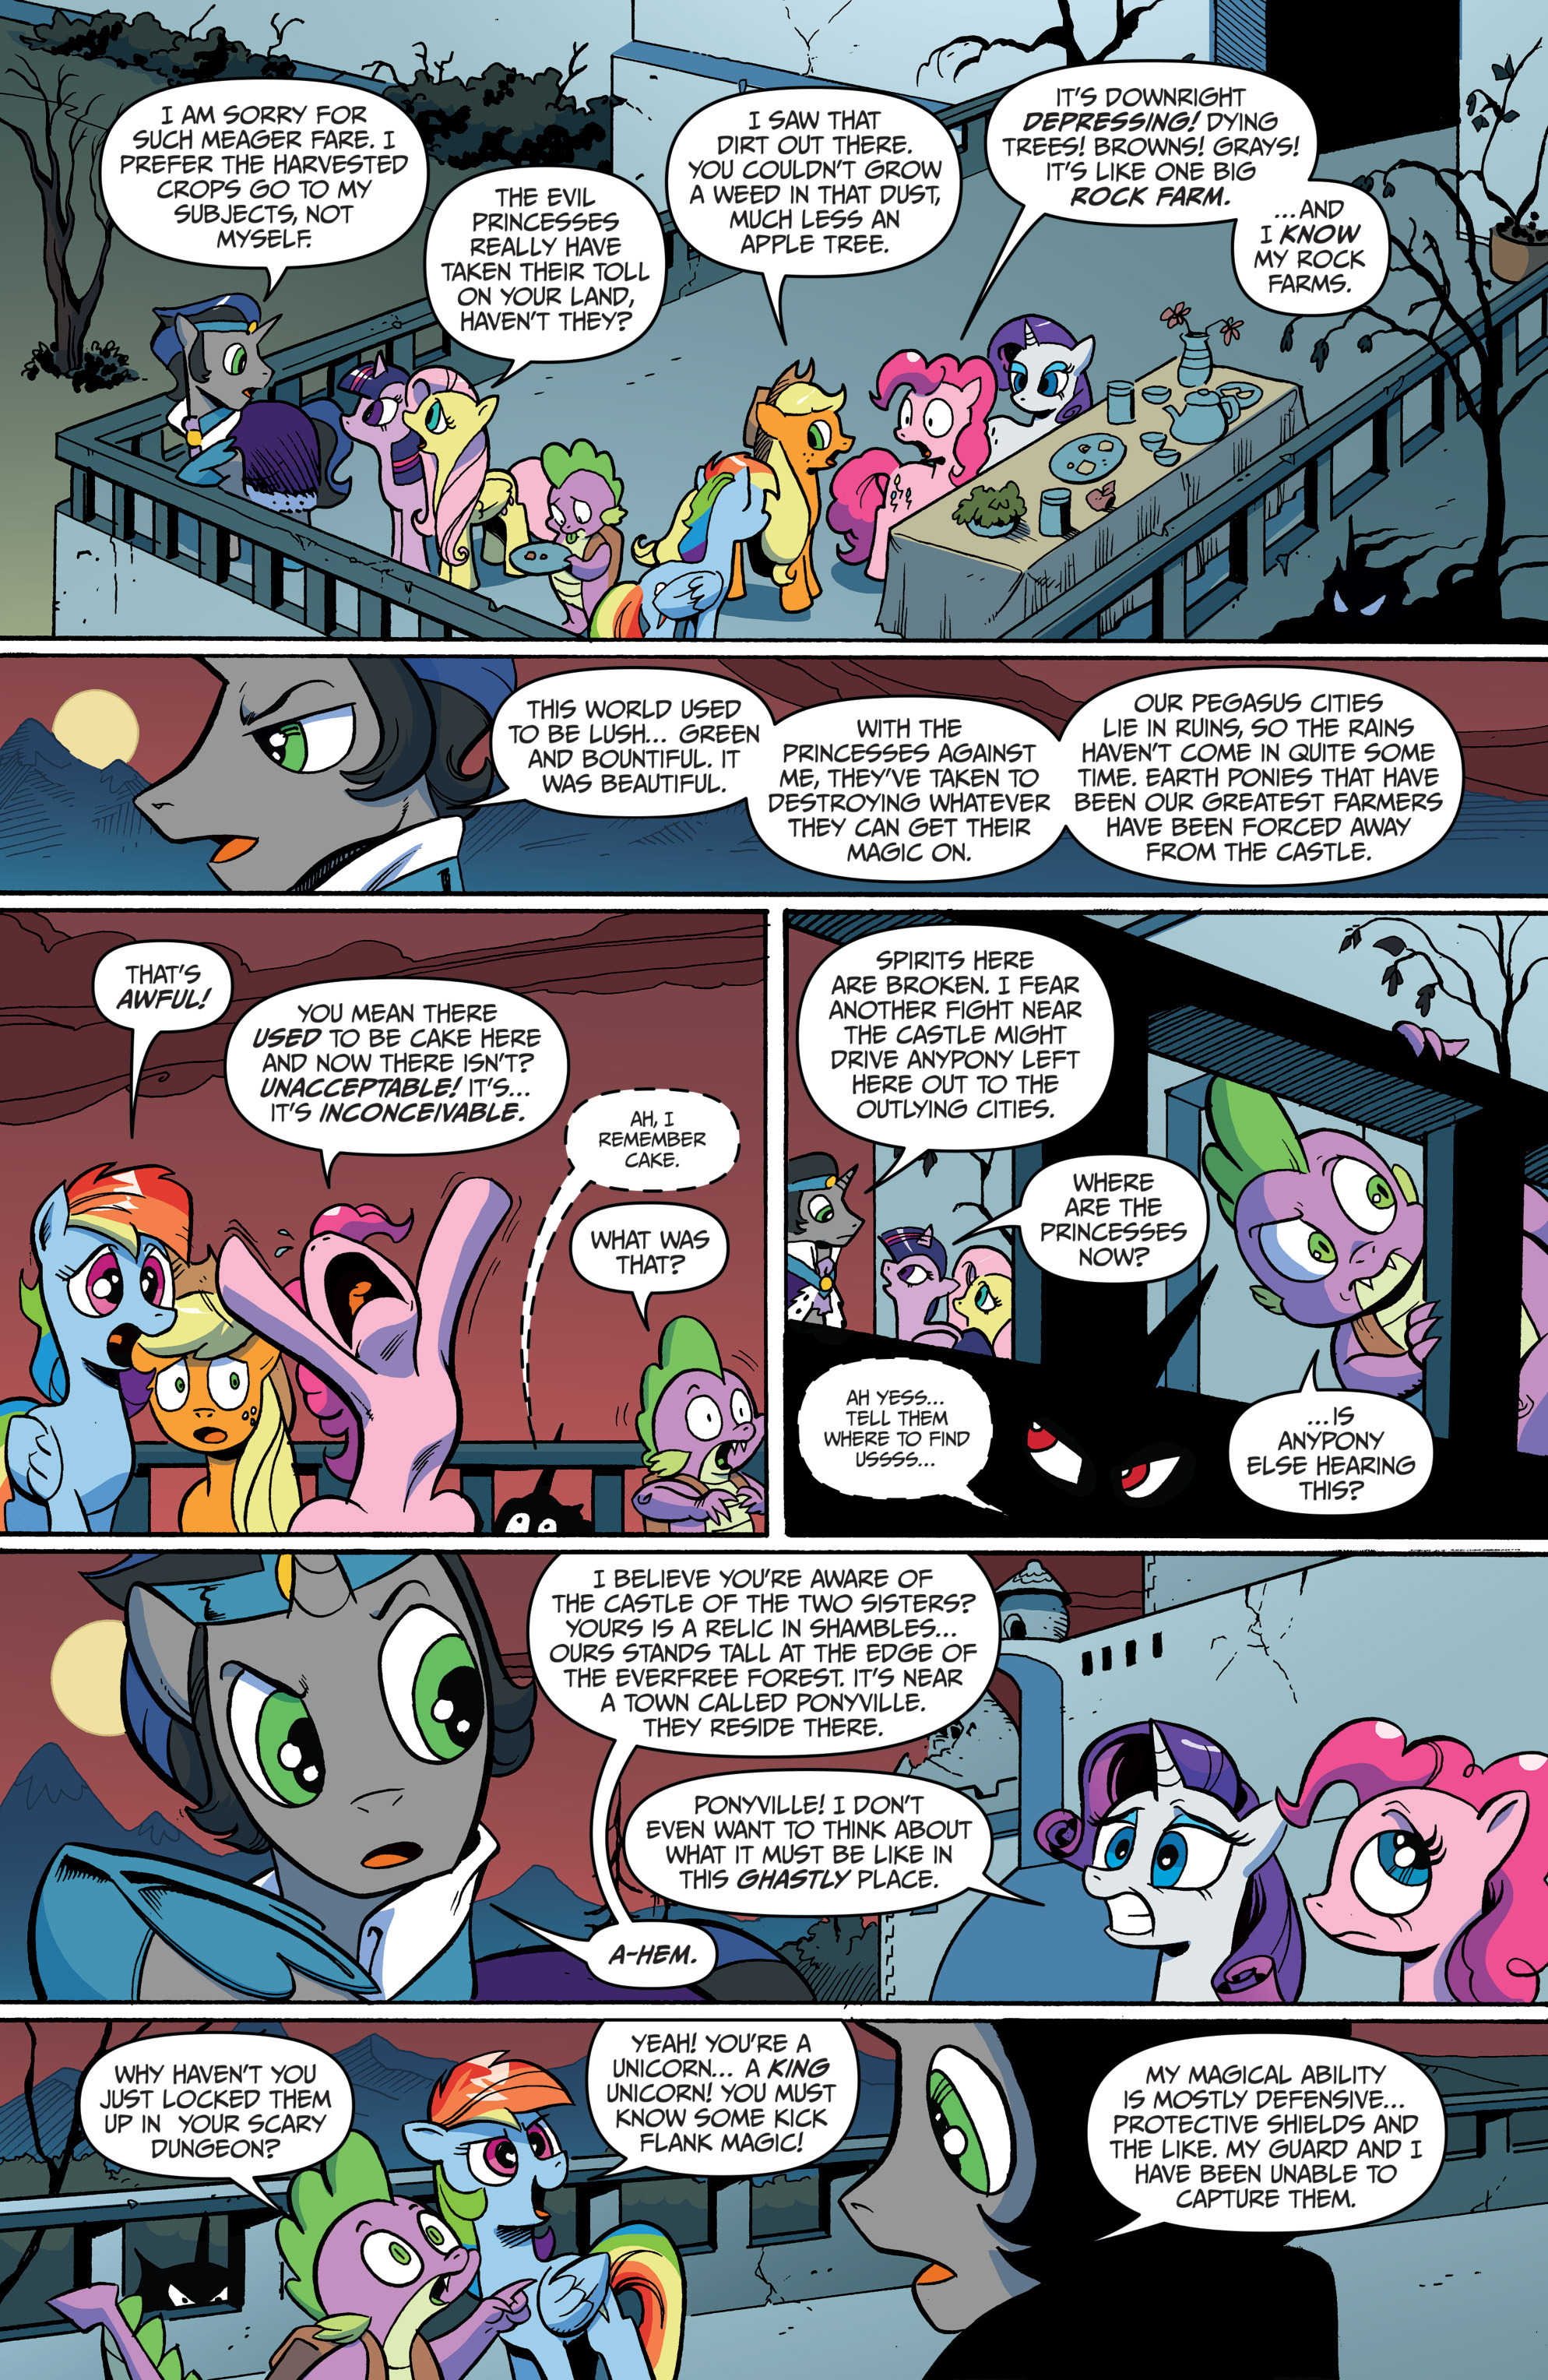 My Little Pony Friendship Is Magic Issue 19 Read My Little Pony